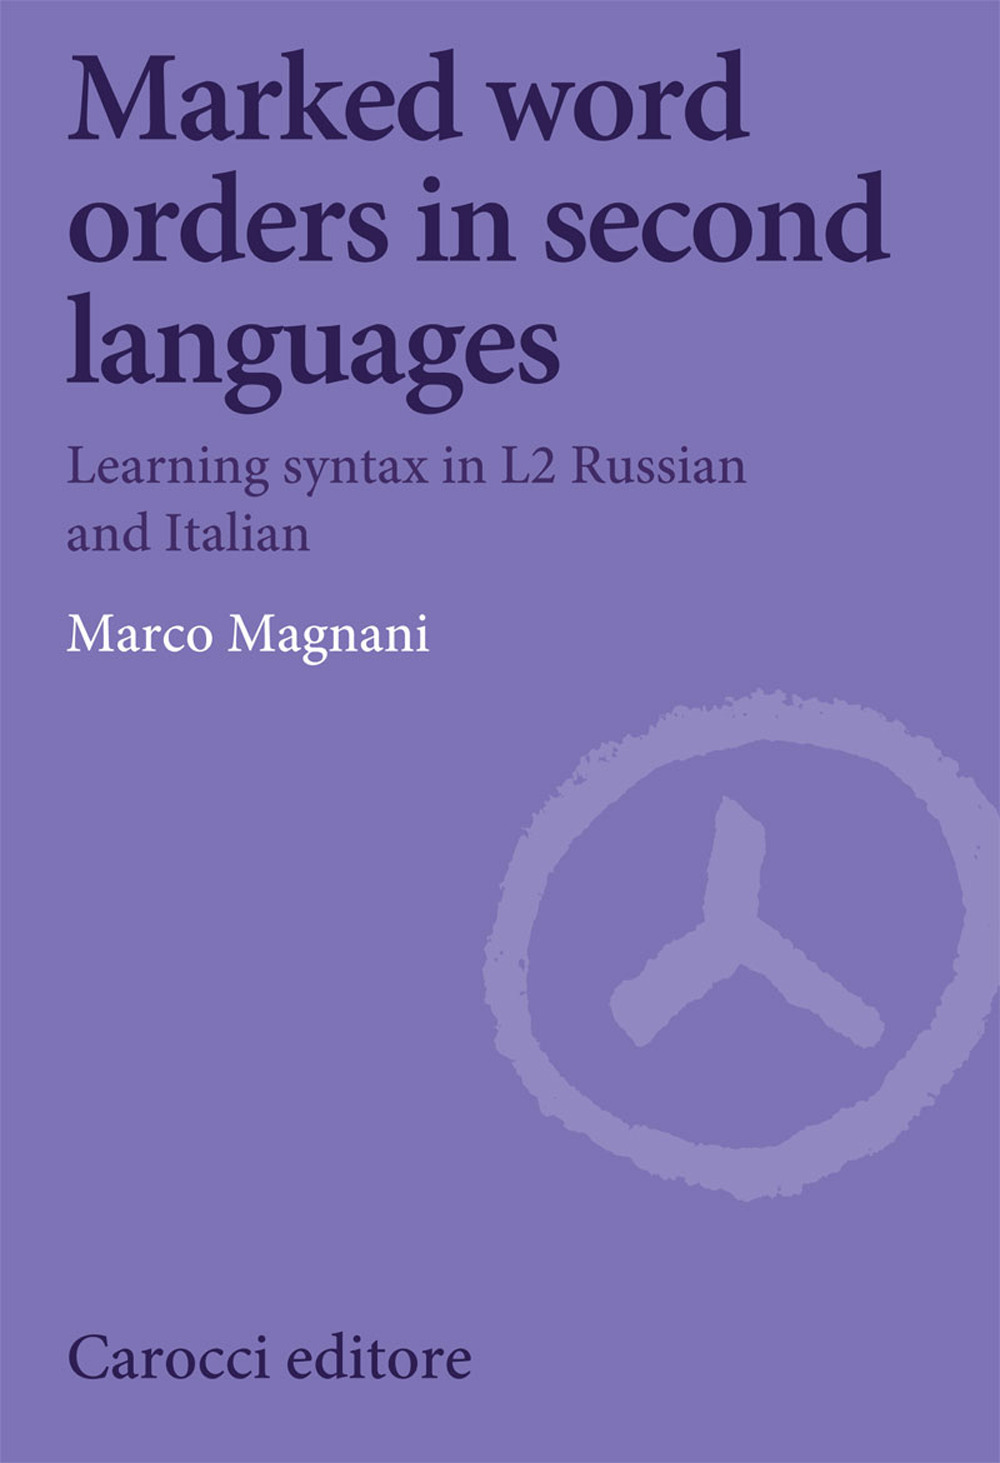 Marked word orders in second languages. Learning syntax in L2 Russian and Italian